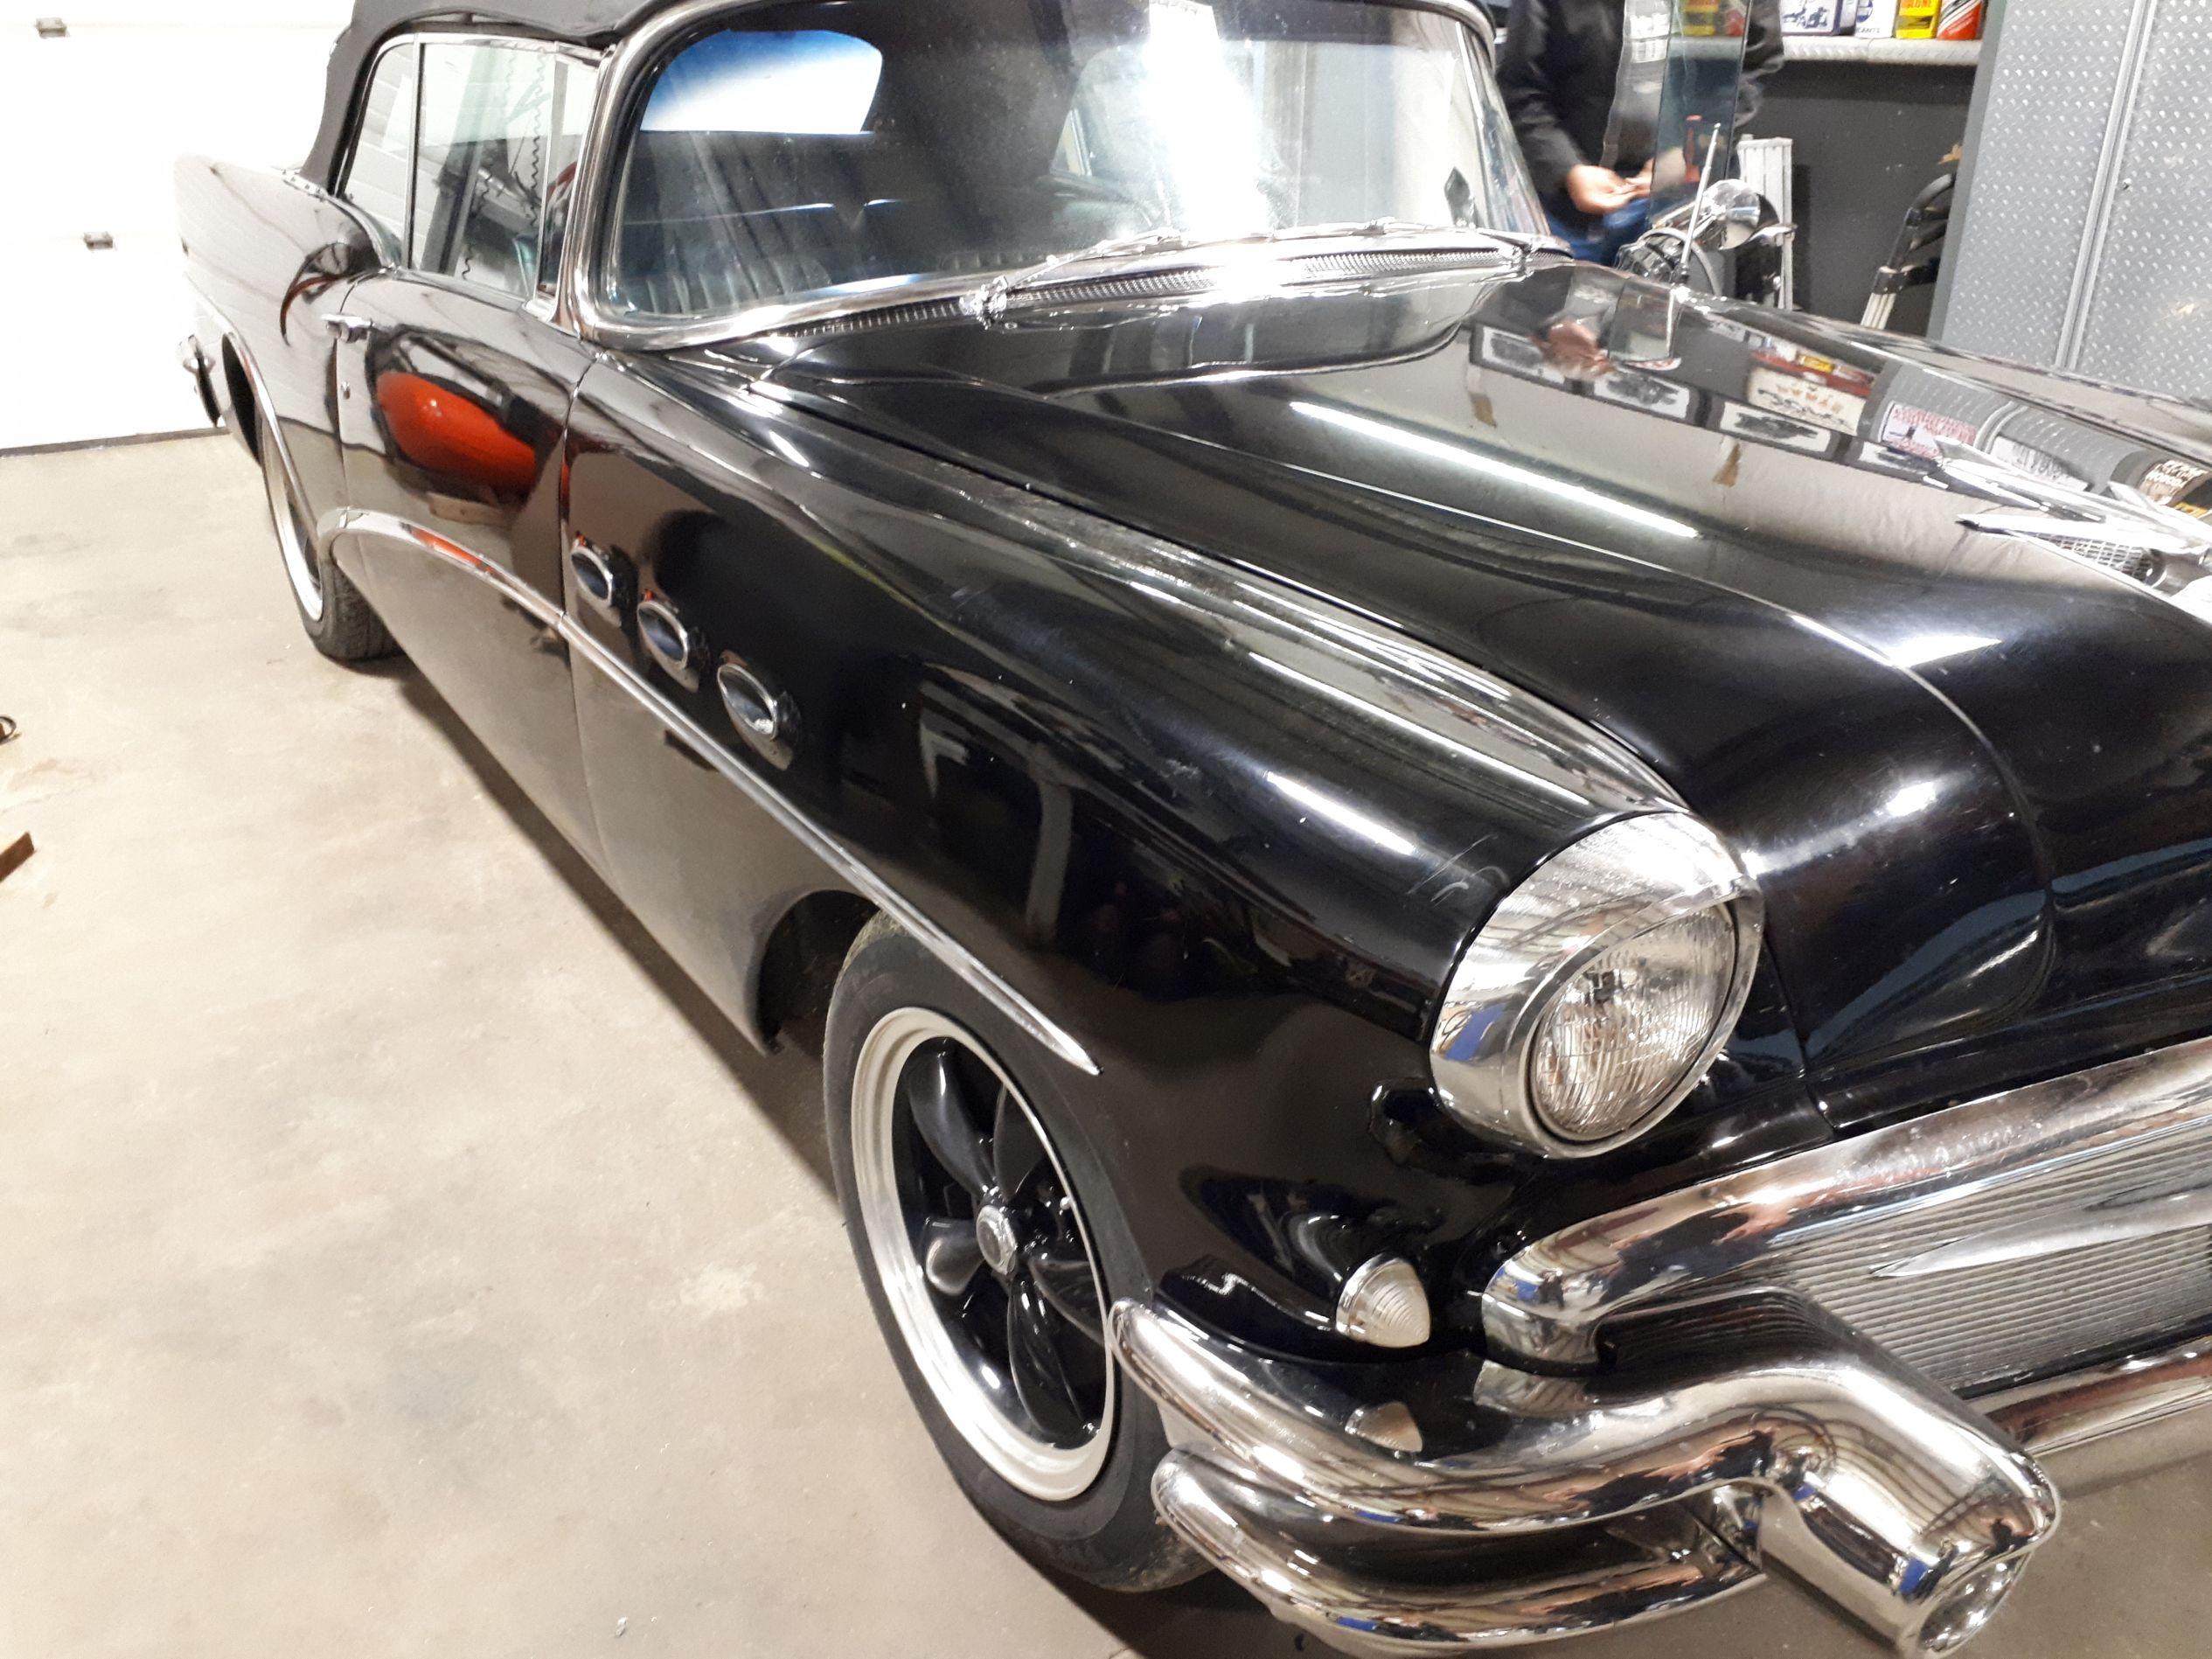 1956 Buick Special Convertible